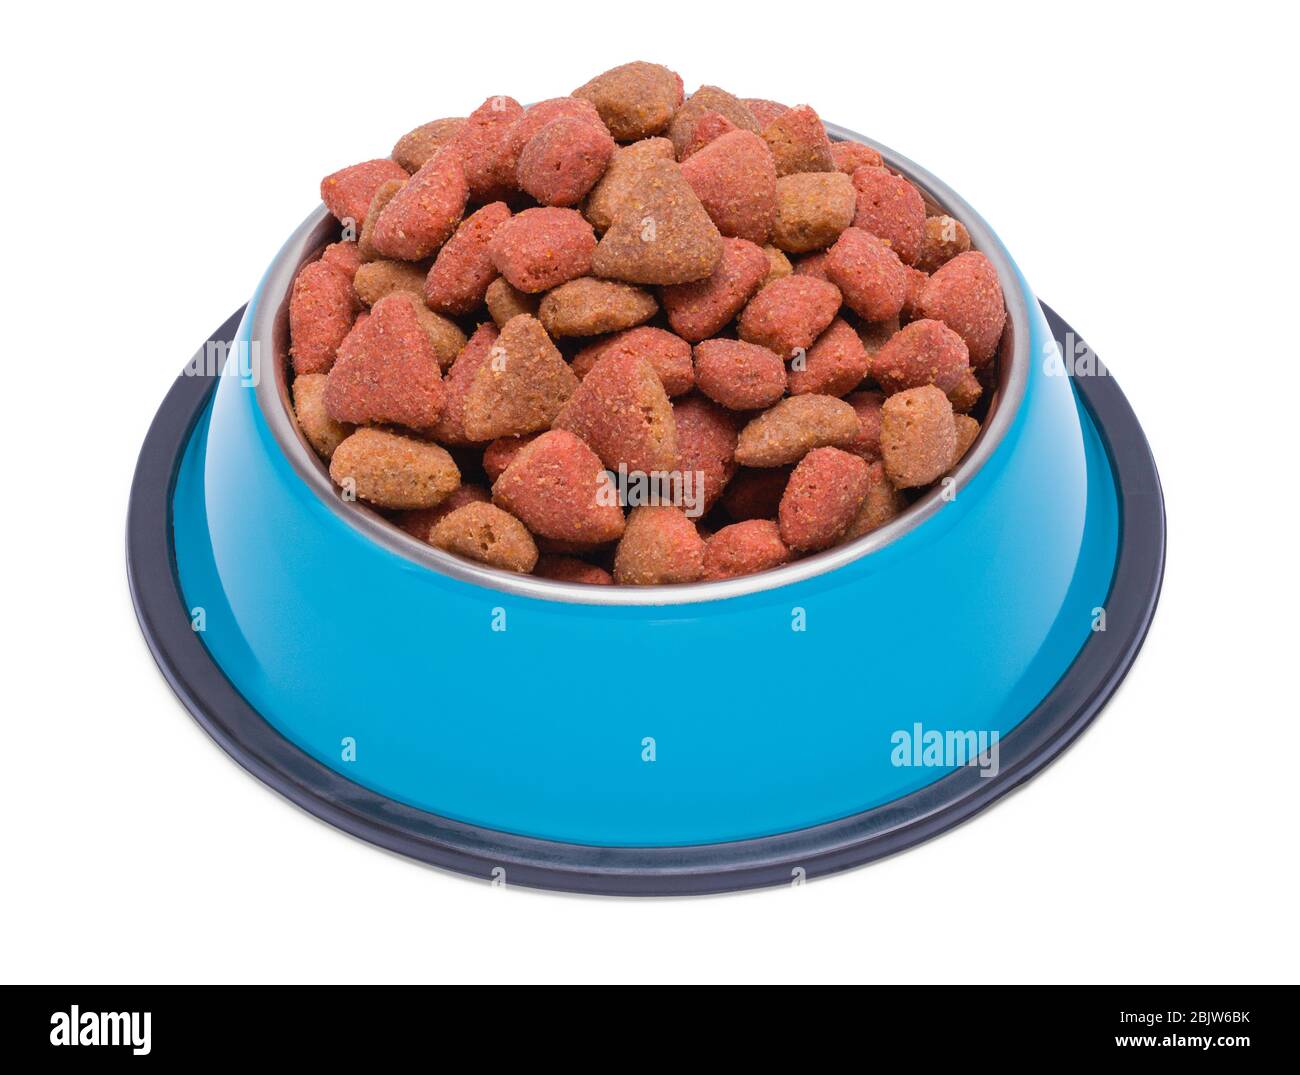 Full Dog Food In Bowl Isolated on White. Stock Photo